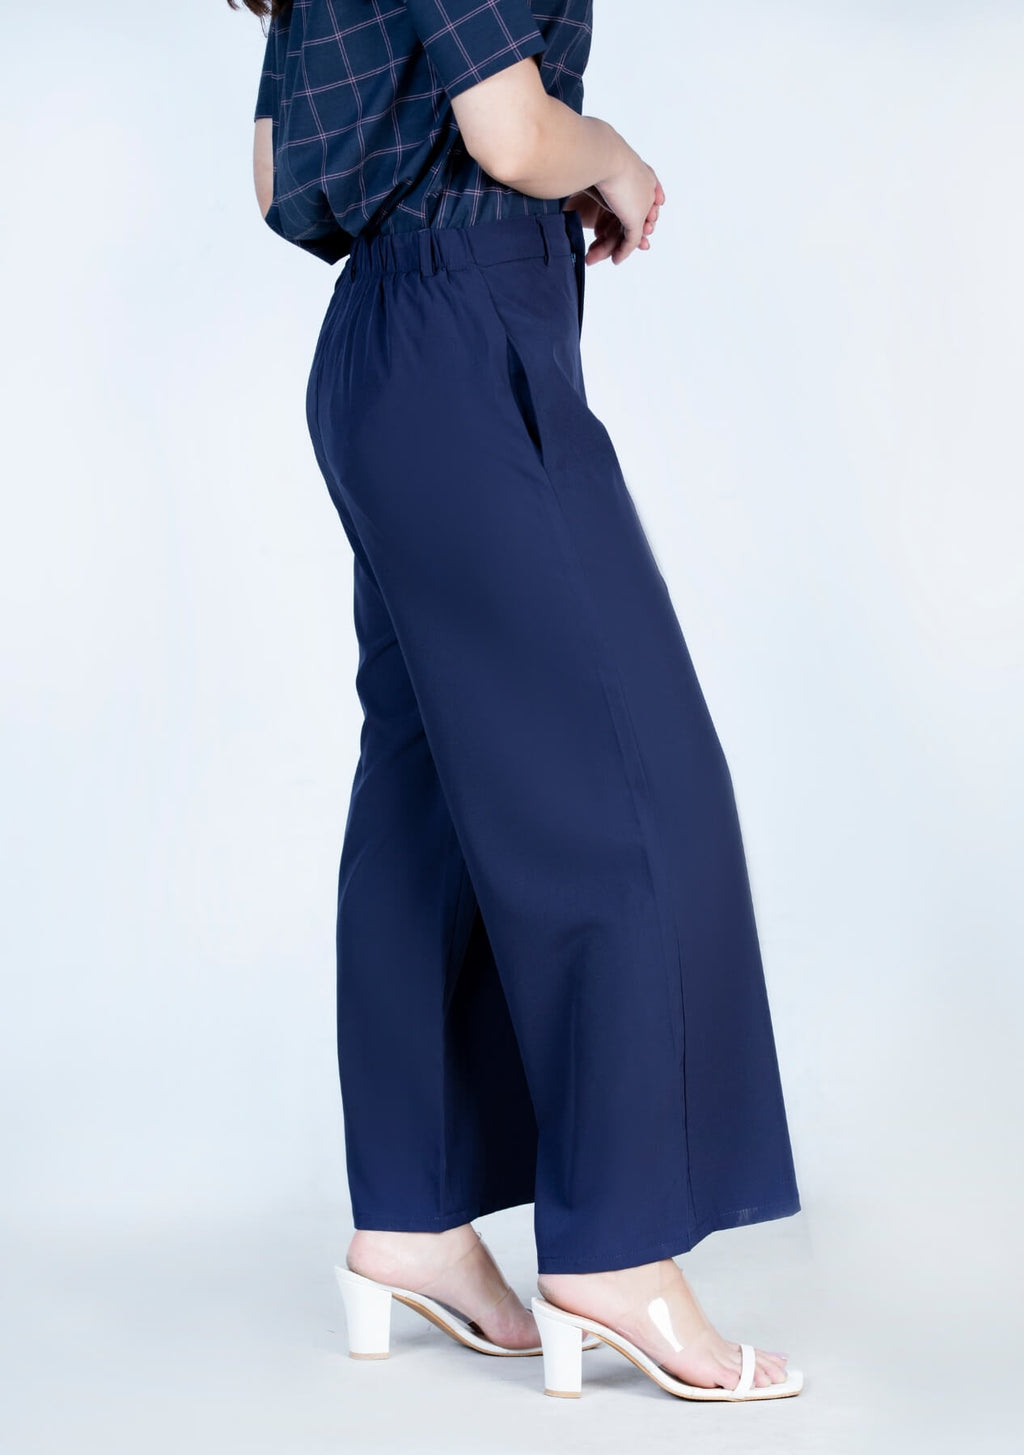 Women's Blue Viscose Culotte Skirt with Elasticated Waistband - NOBLA Size  T.U. (from S to XL)